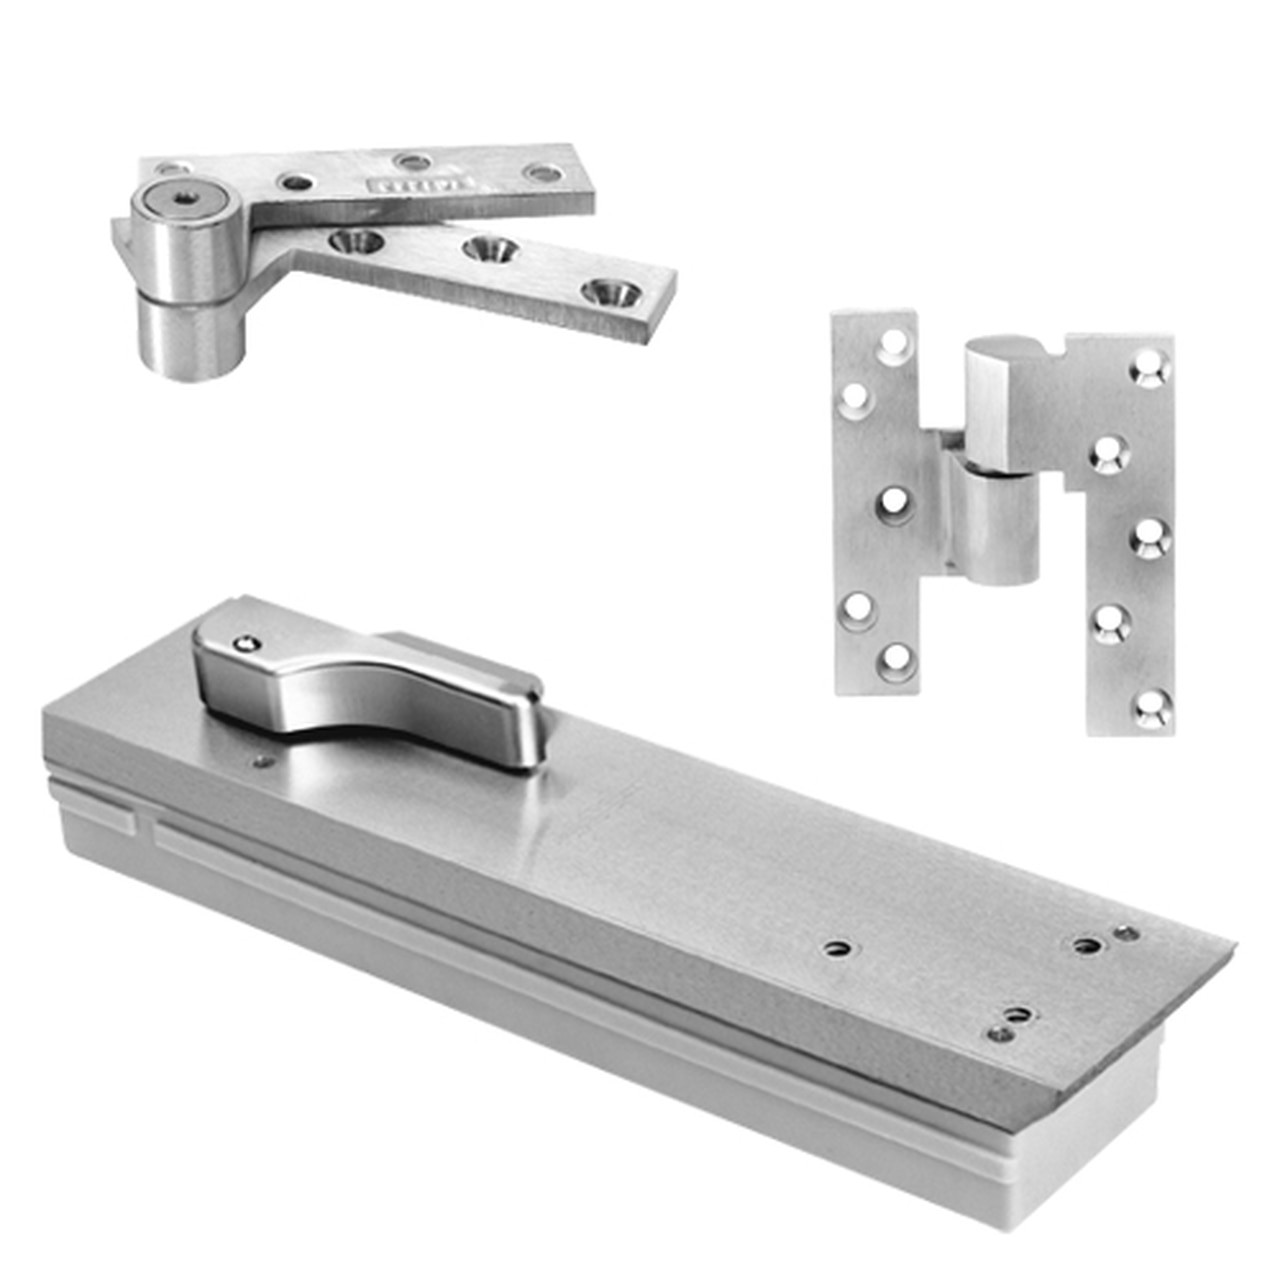 FQ5103NBC-LFP-LCC-LH-625 Rixson Q51 Series Fire Rated 3/4" Offset Hung Shallow Depth Floor Closers in Bright Chrome Finish